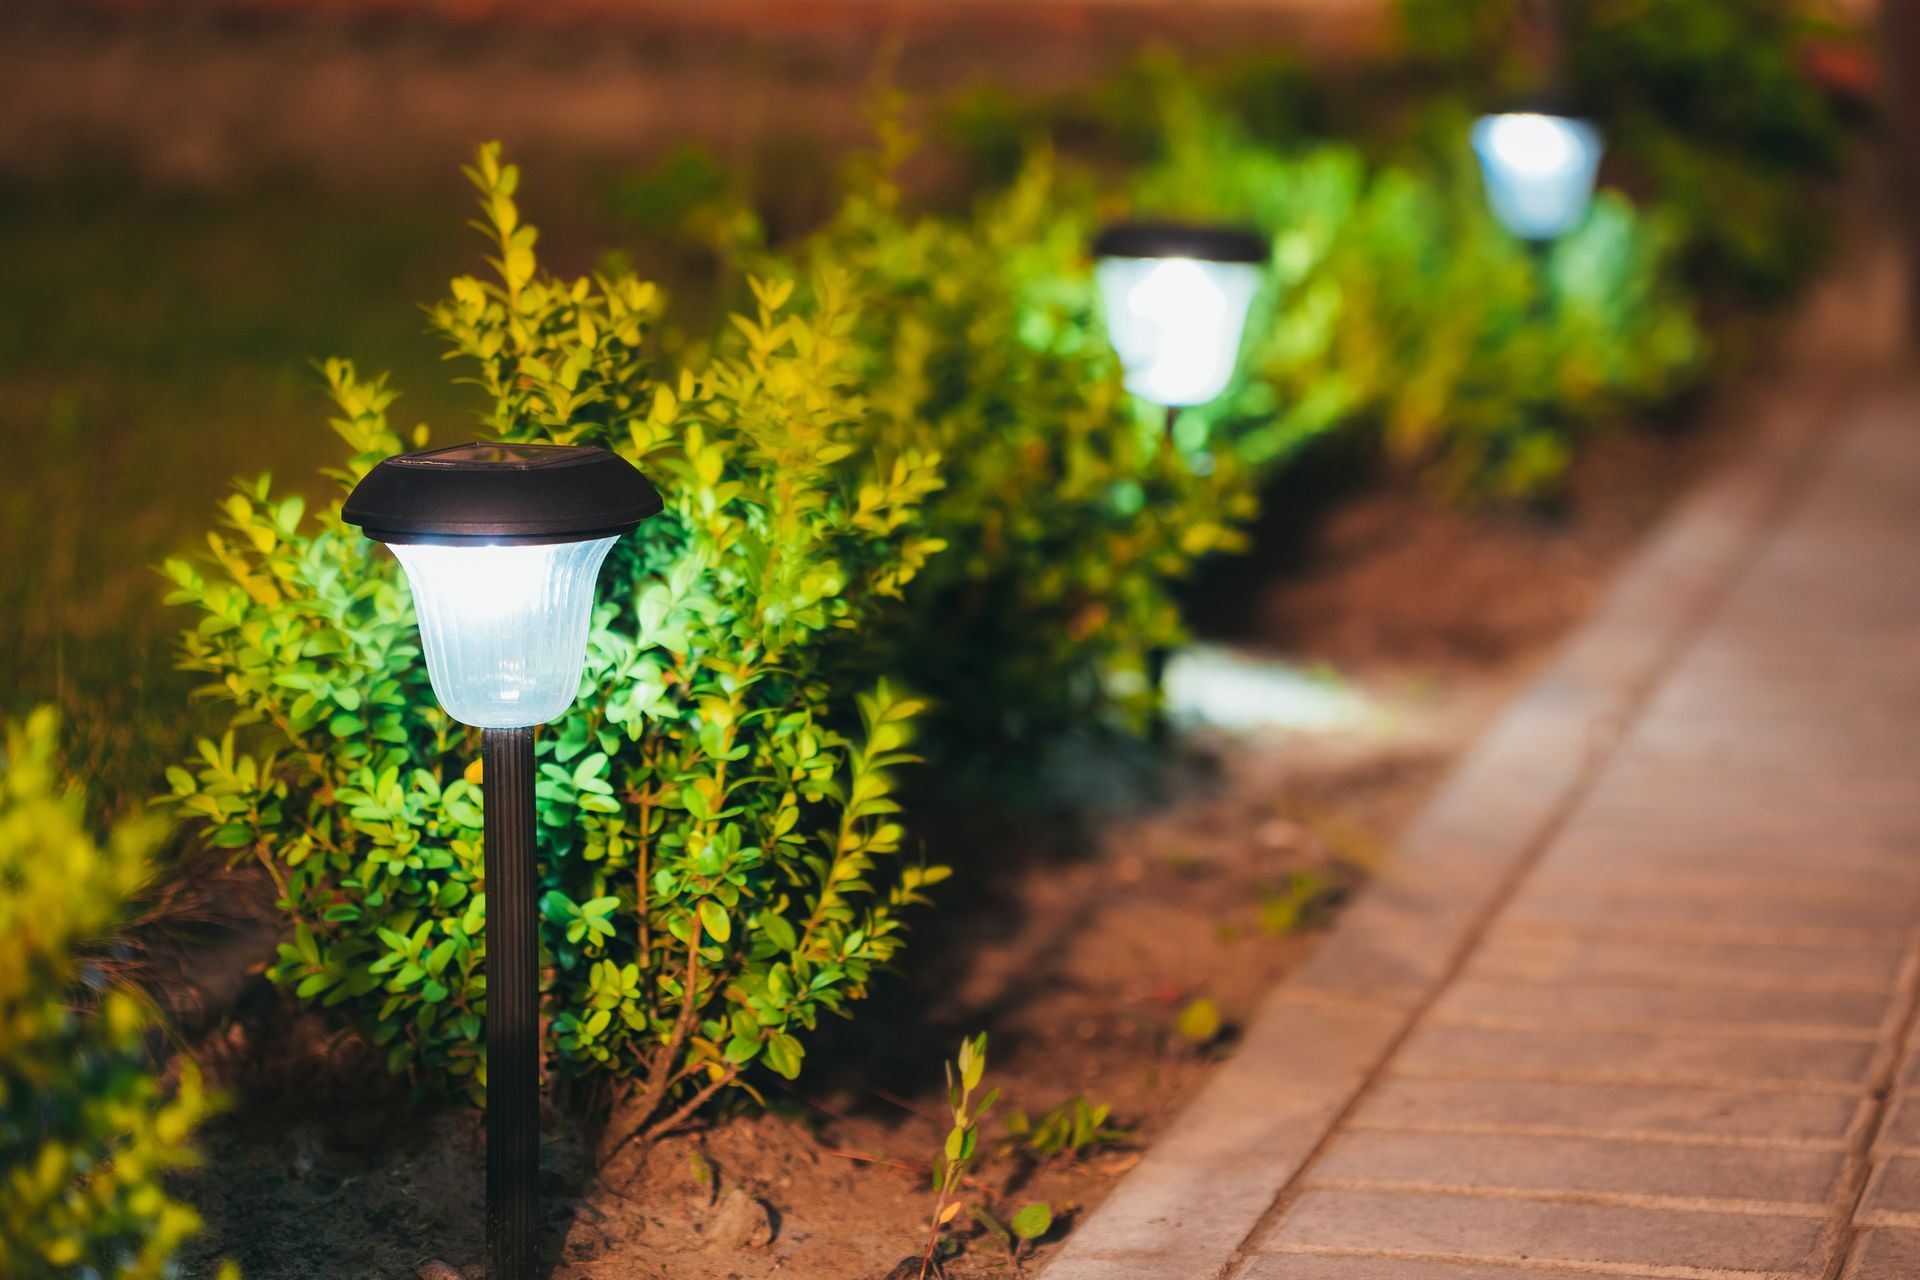 A row of solar powered lights sitting next to bushes on a sidewalk.